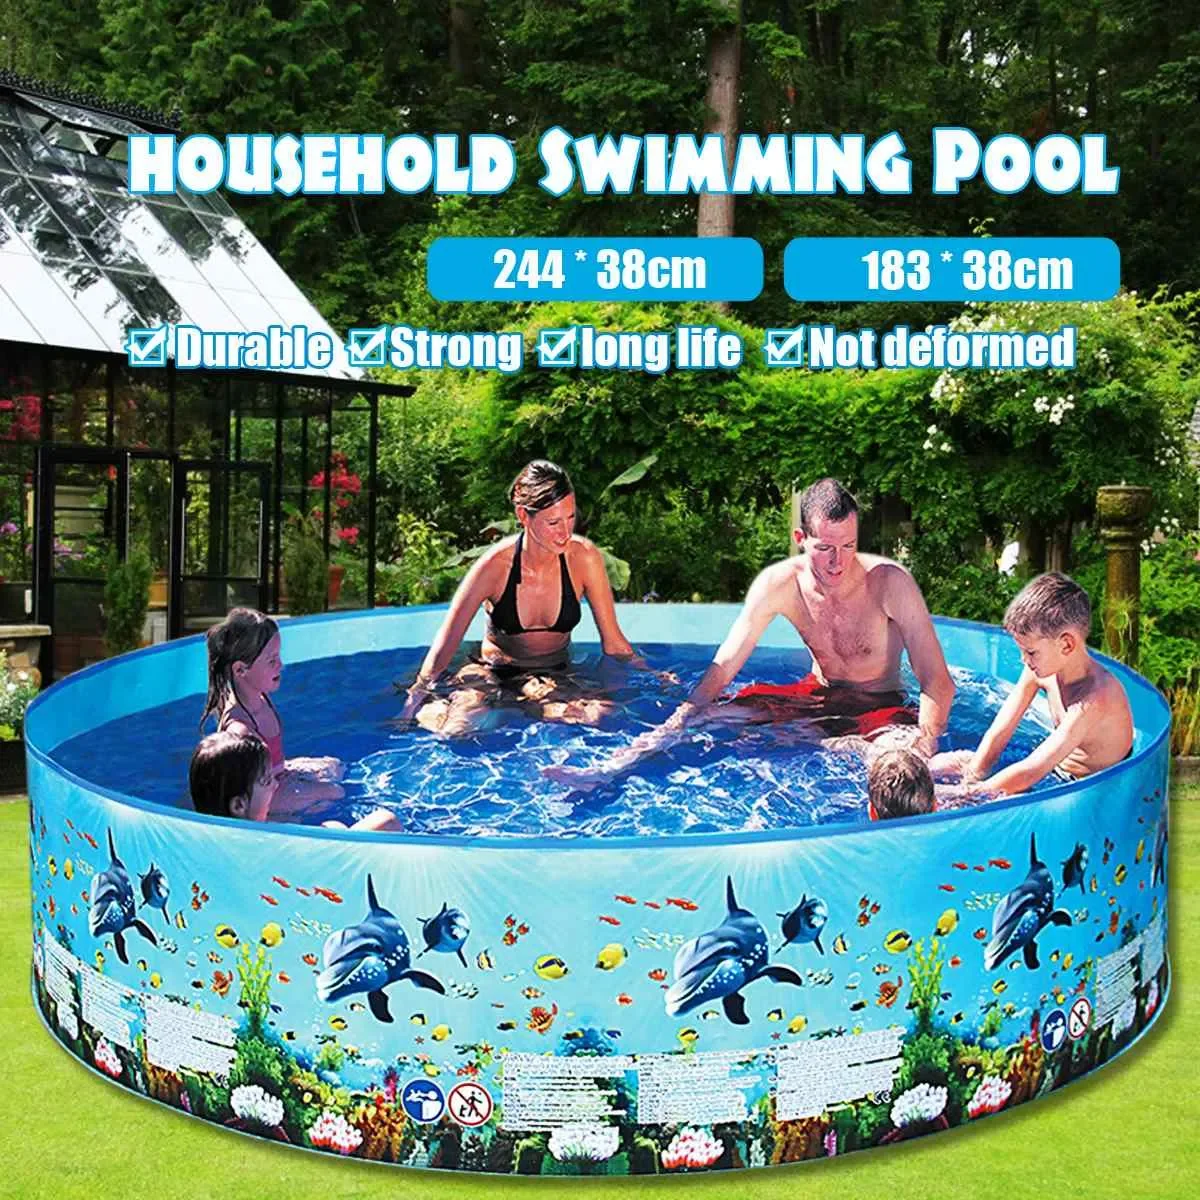 framed-pool-swimming-pool-large-pools-for-country-house-no-inflatable-family-paddling-pools-for-adults-kids-swimming-safe